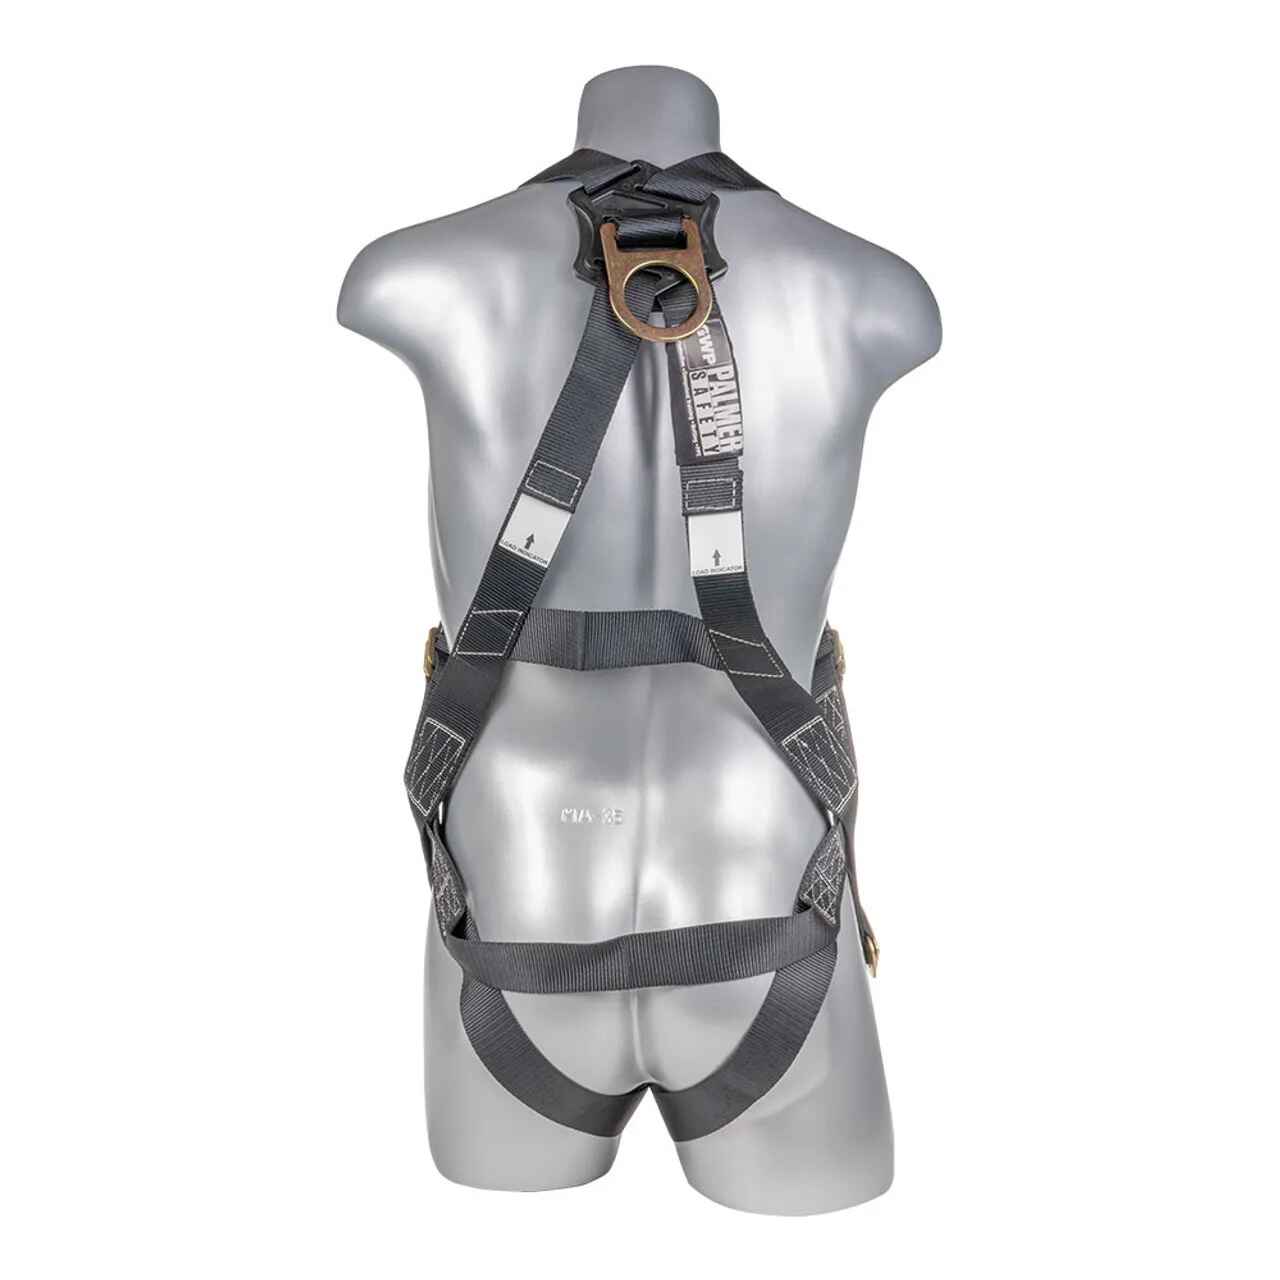 Full Protection 5pt. Body Harness and Lanyard Combo - Defender Safety